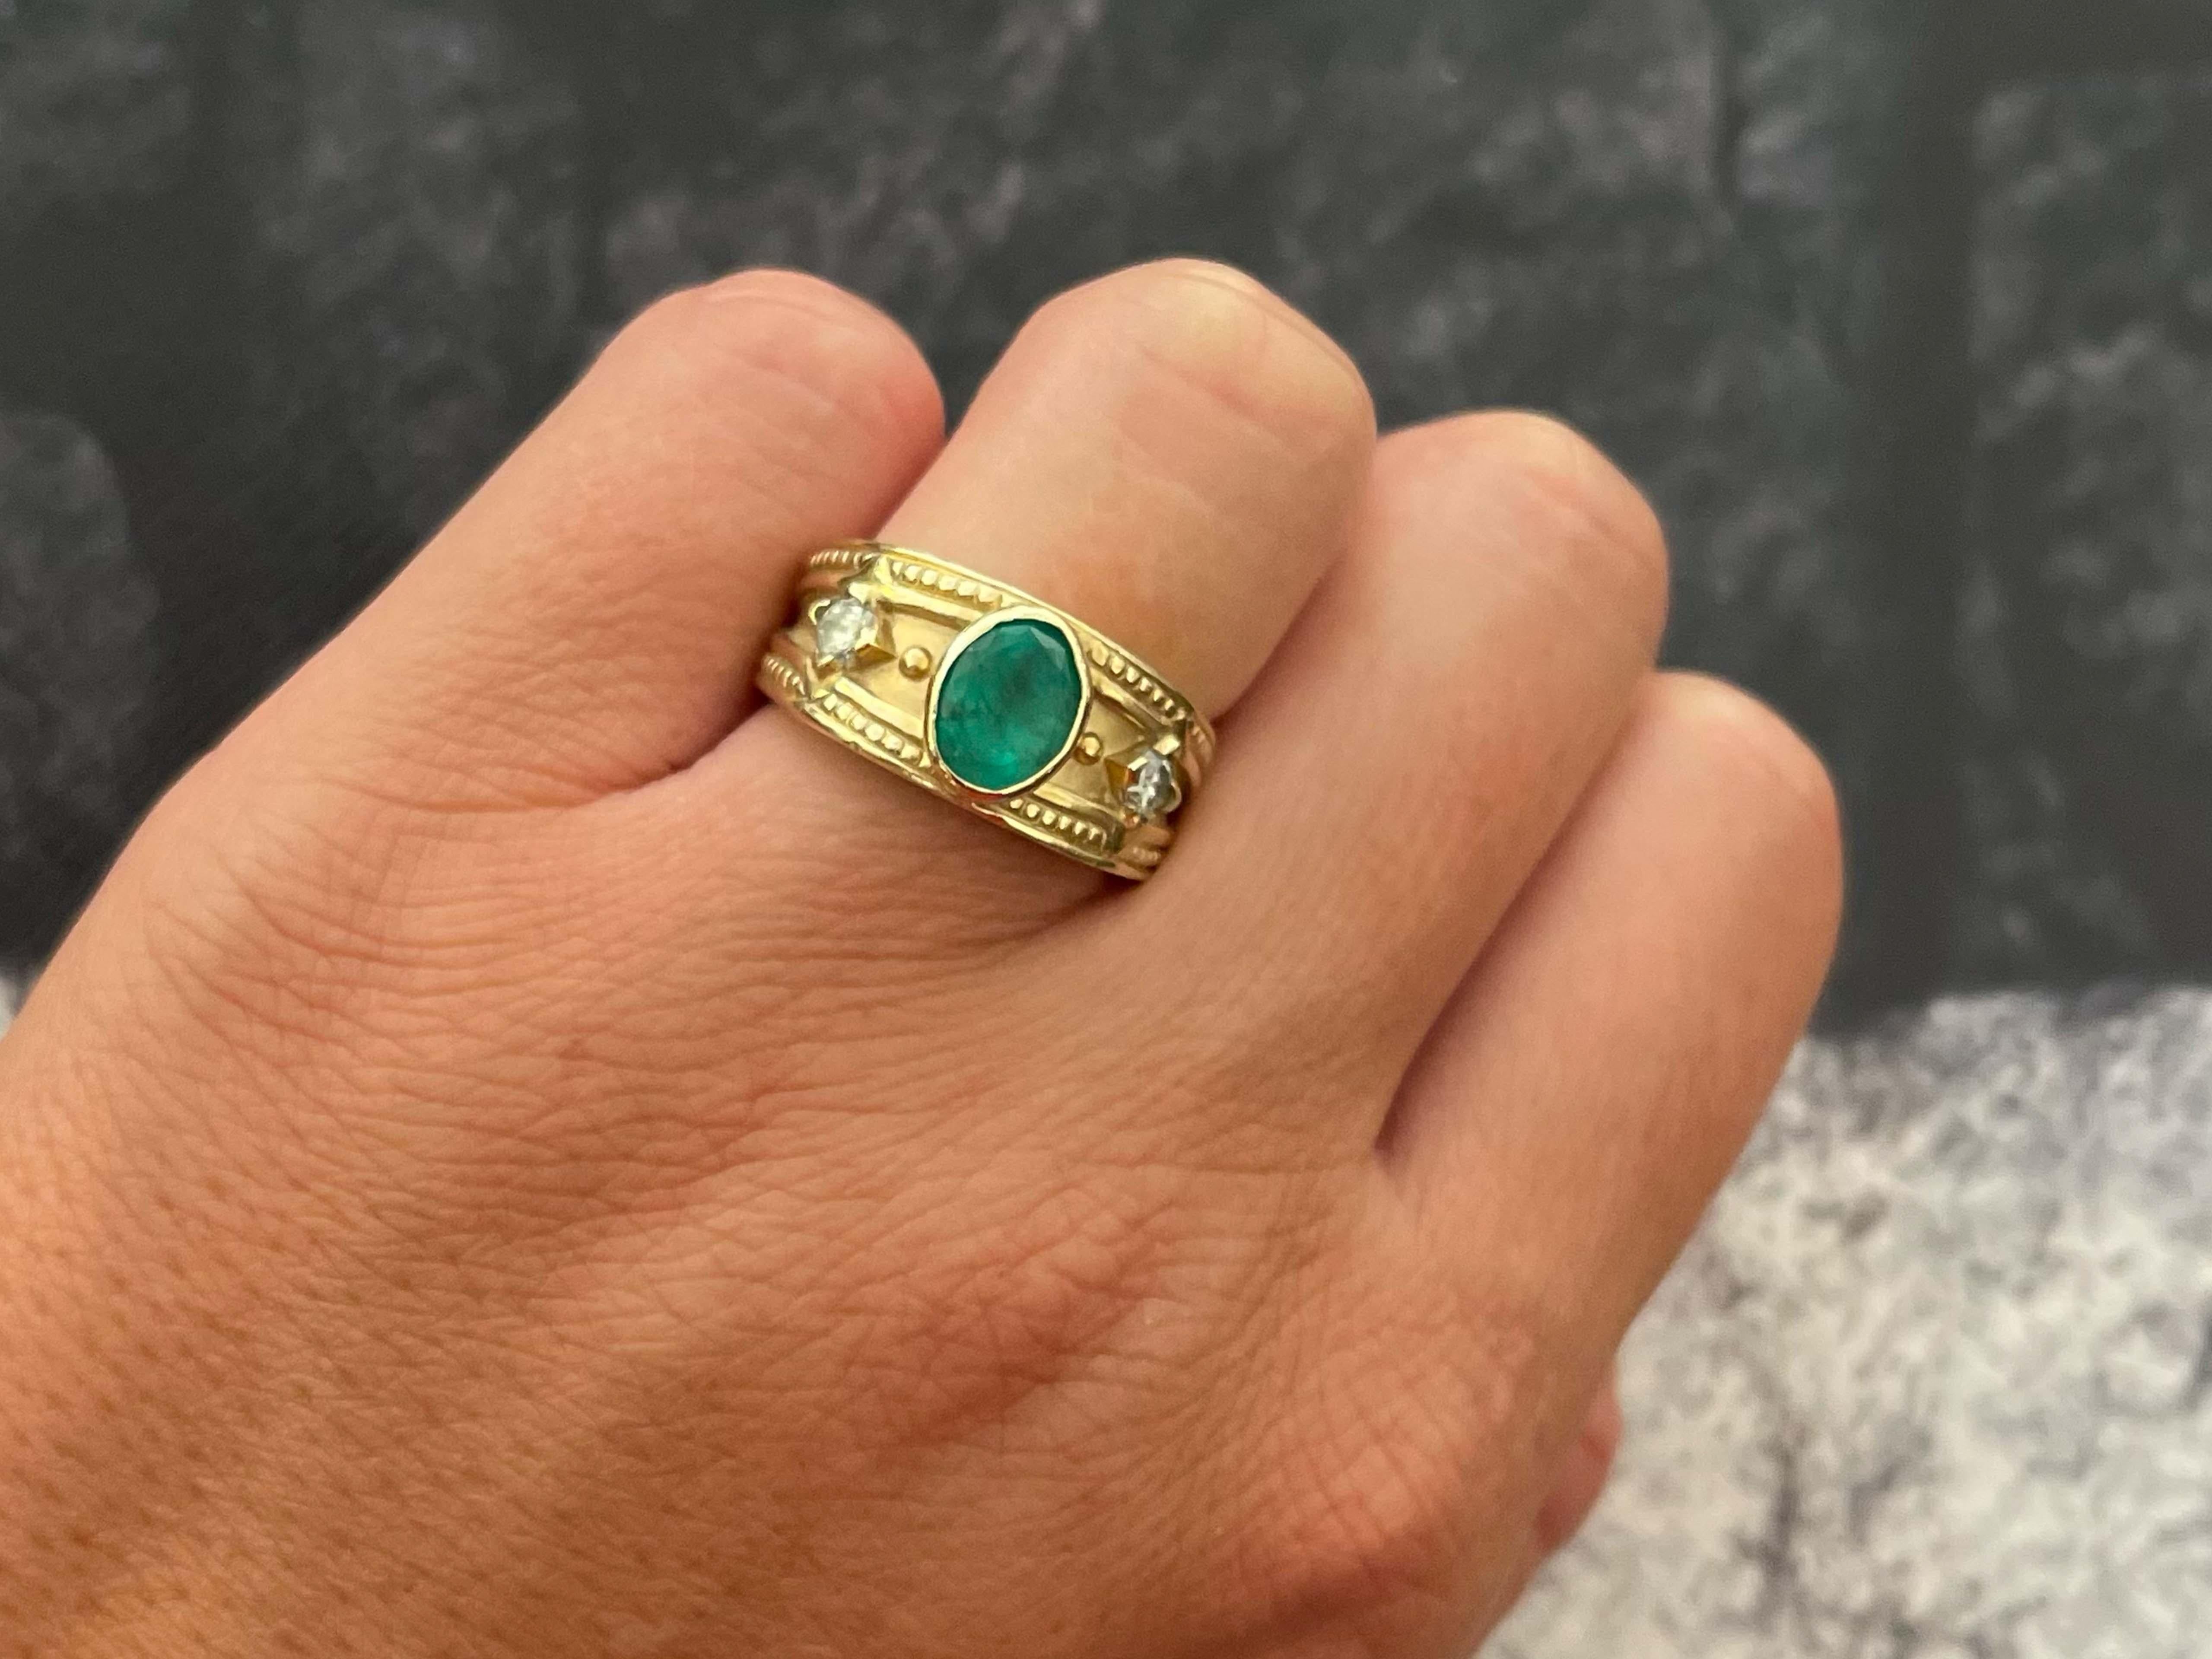 Item Specifications:

Metal: 14k Yellow Gold

Style: Statement Ring

Ring Size: 7 (resizing available for a fee)

Total Weight: 10.8 Grams
​
​Diamond Carat Weight: 0.20
​
​Diamond Color: I
​
​Diamond Clarity: I1

Gemstone Specifications:

Gemstones: